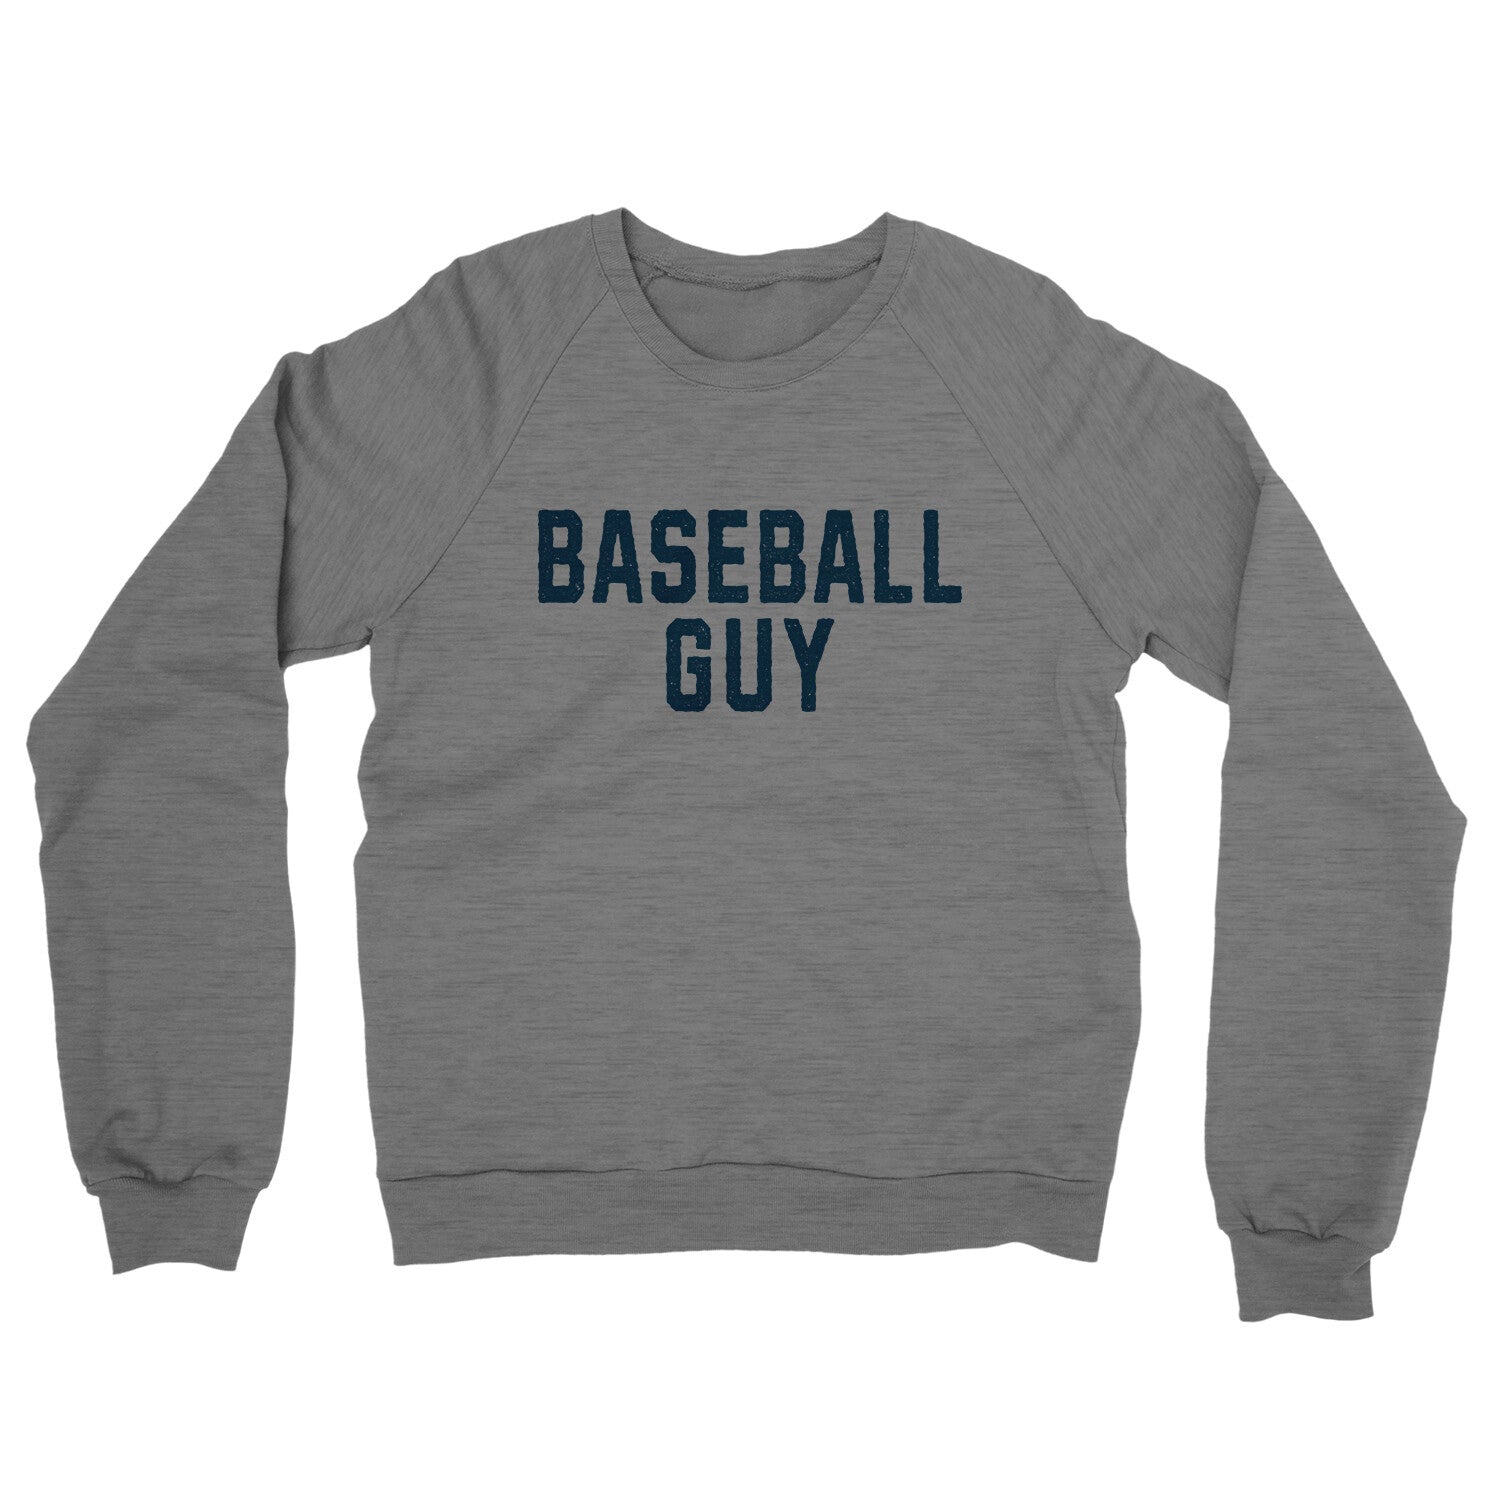 Baseball Guy in Graphite Heather Color